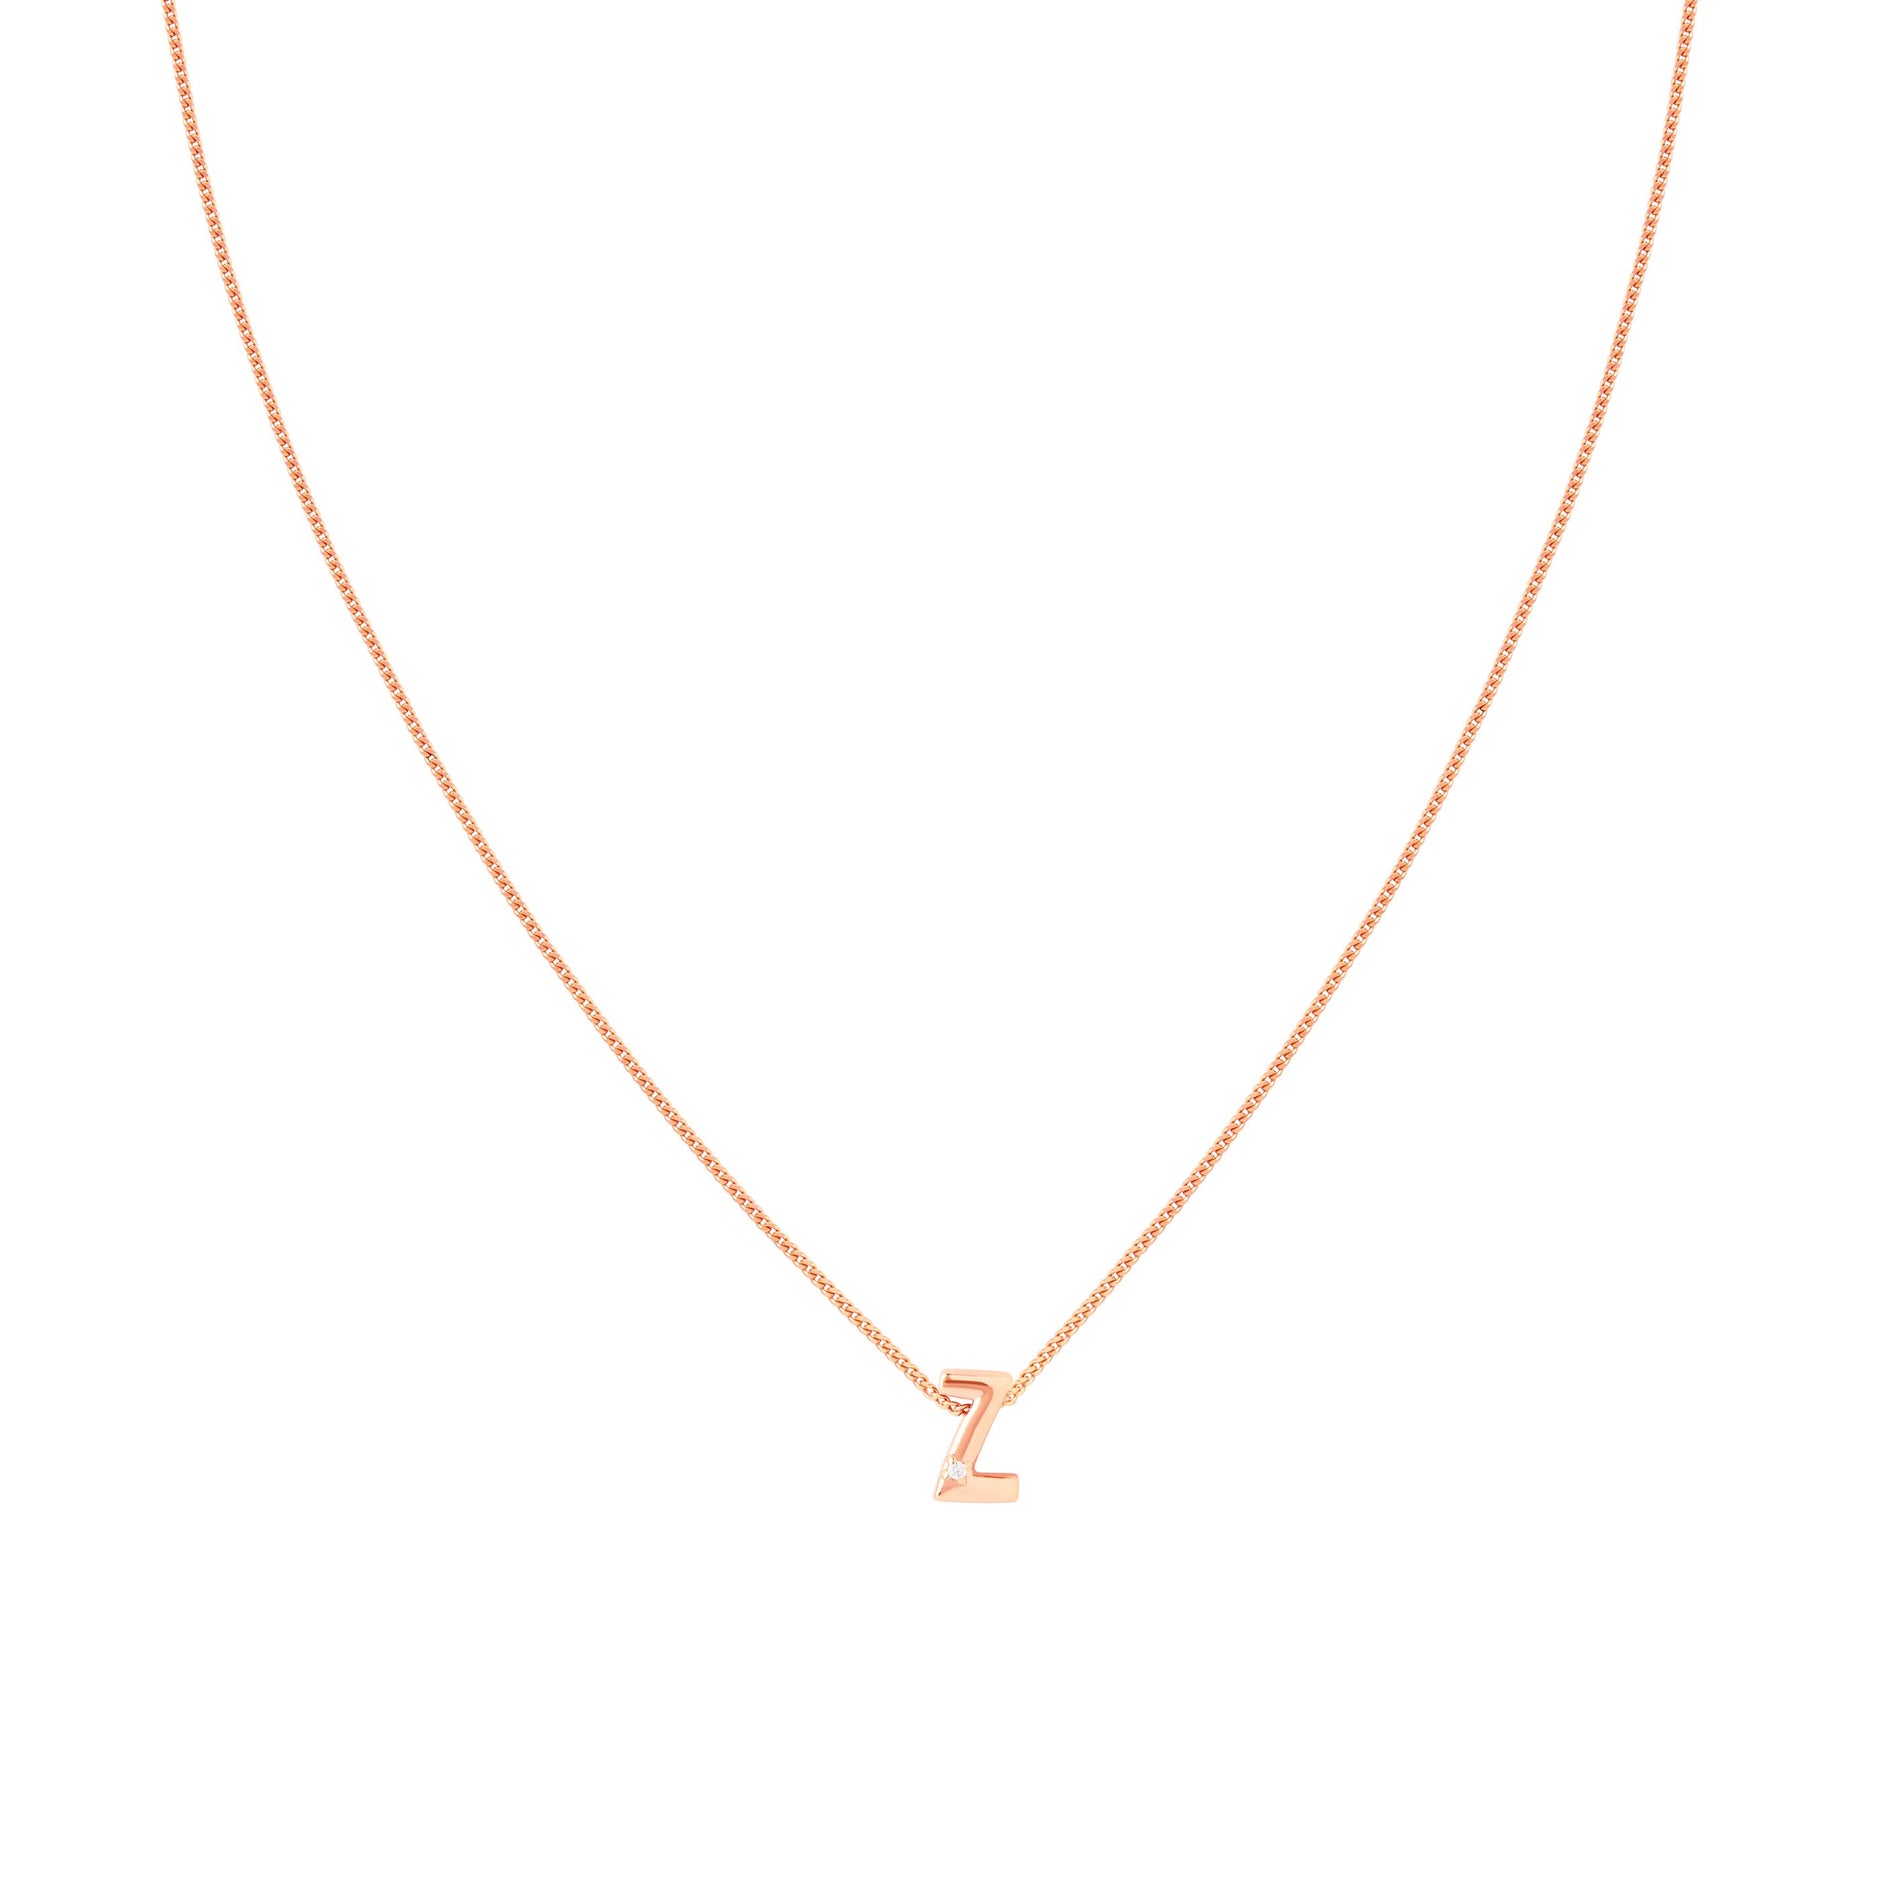 Z Initial Pendant Necklace in Rose Gold